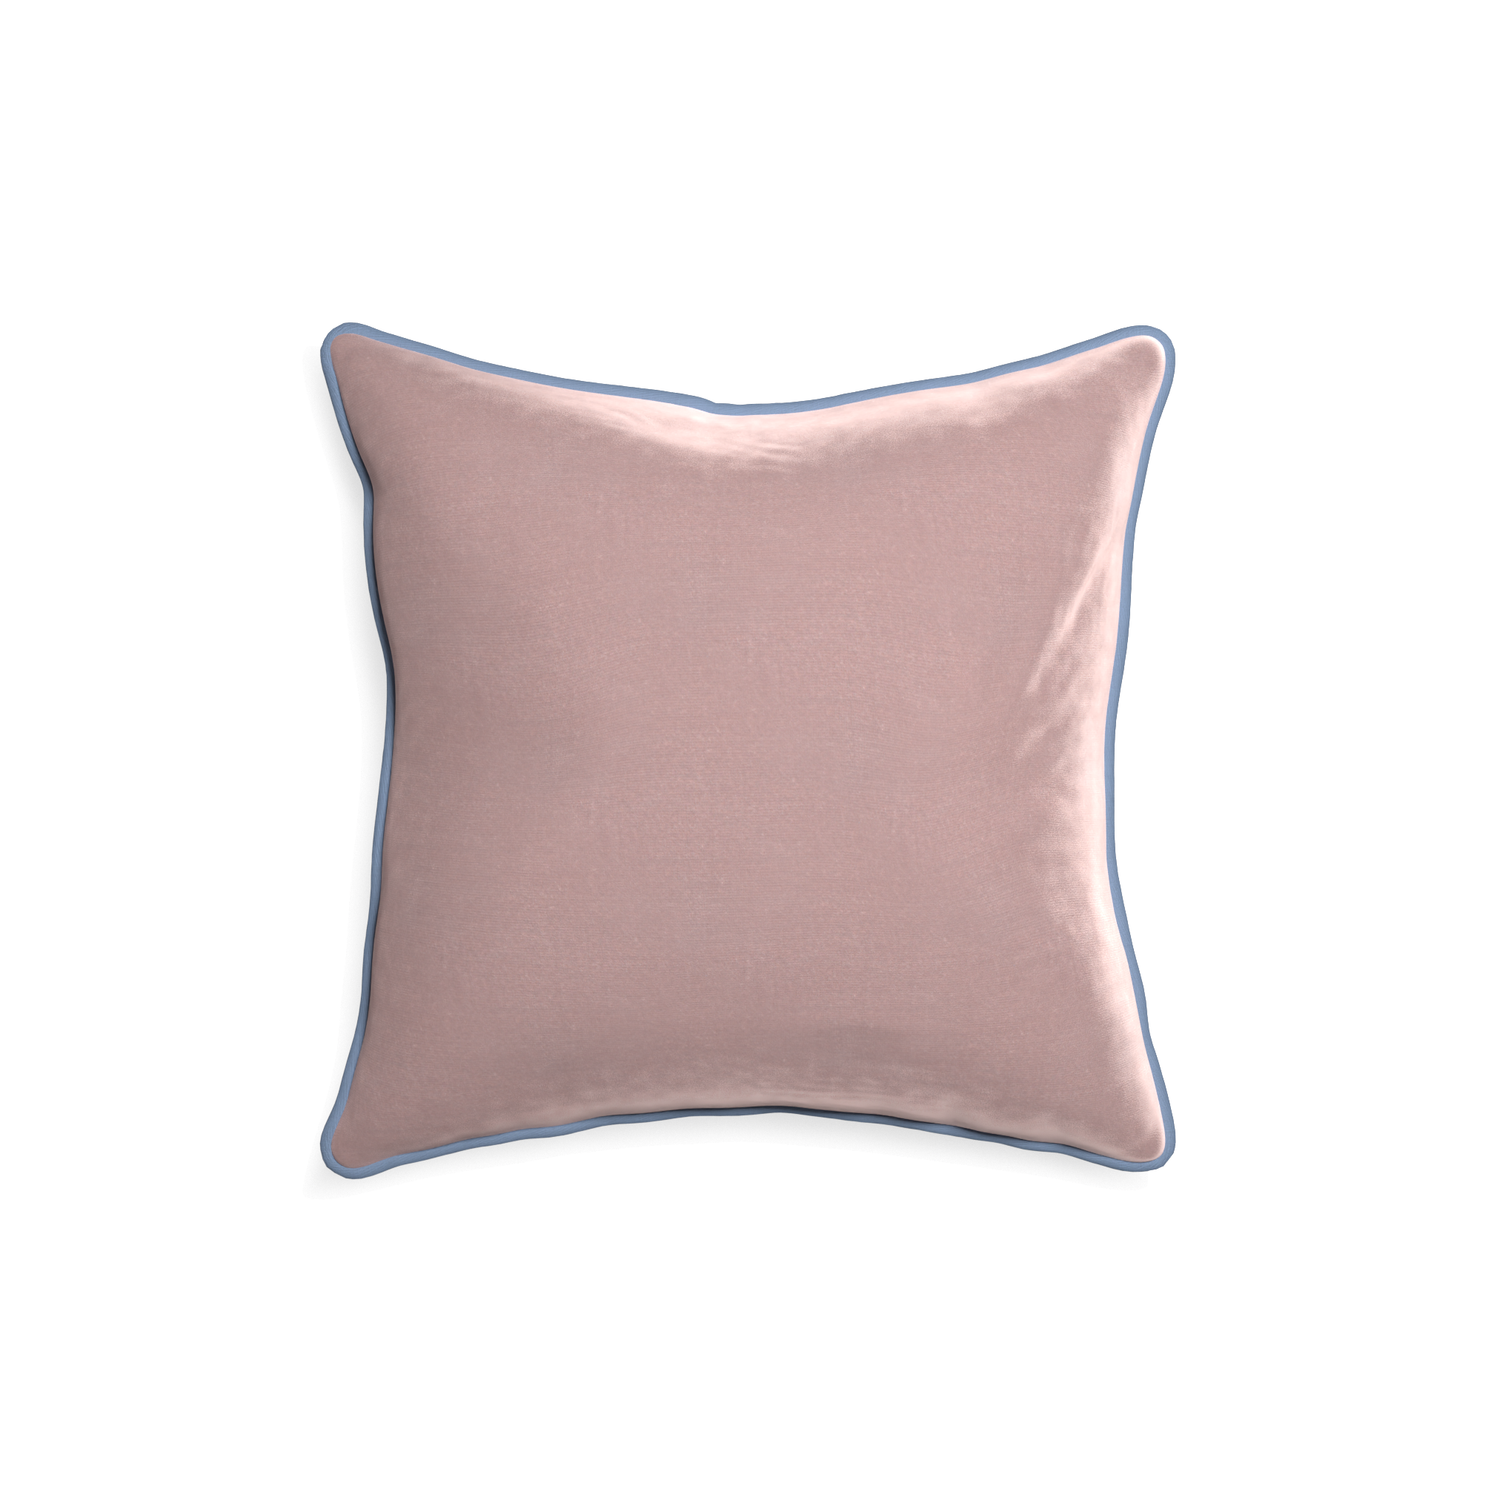 square mauve velvet pillow with sky blue piping